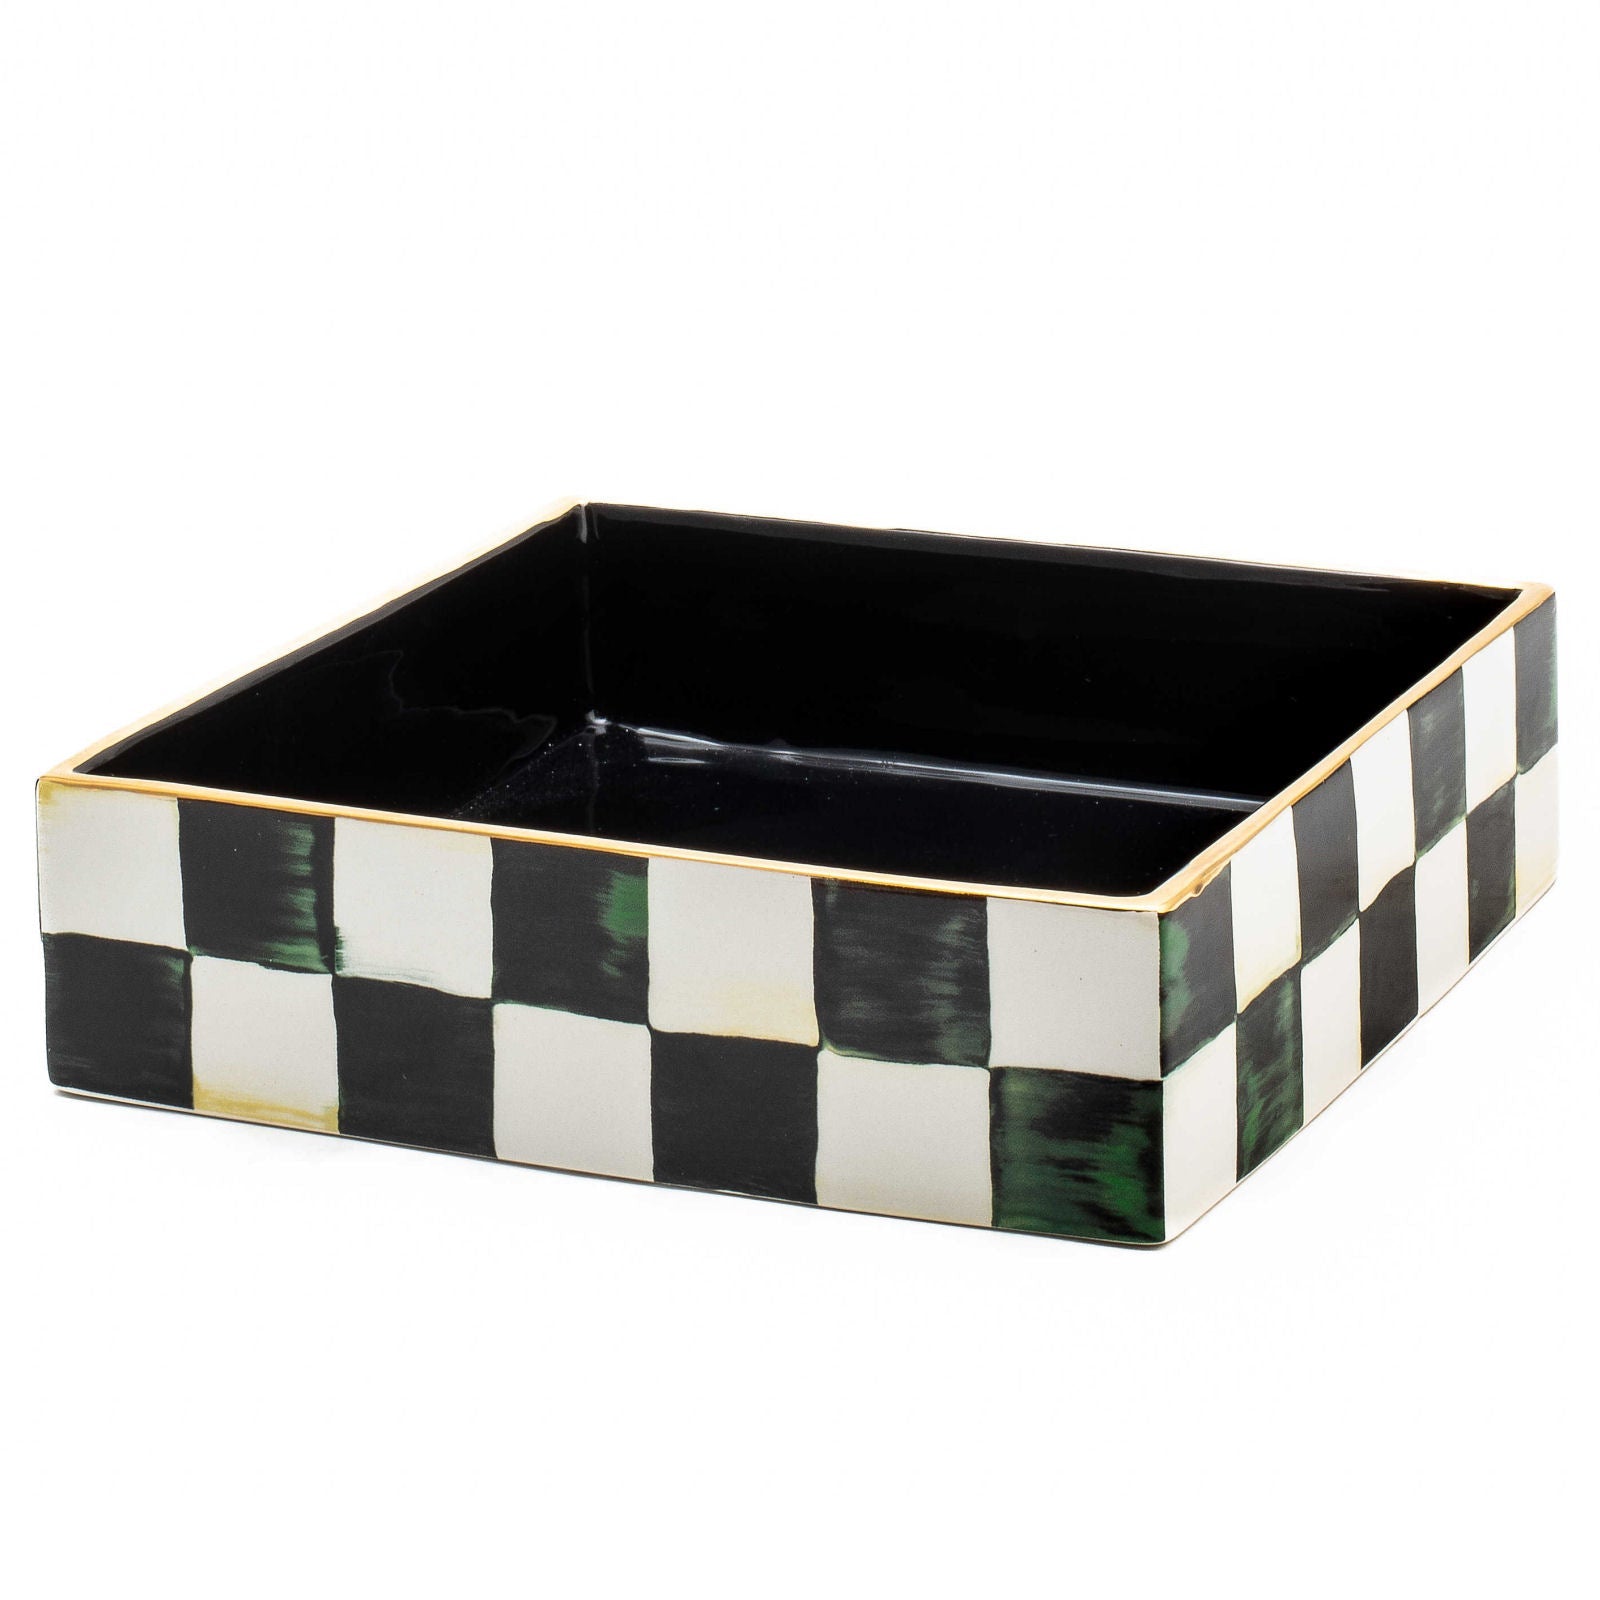 Courtly Check Luncheon Napkin Holder - |VESIMI Design| Luxury Bathrooms and Home Decor